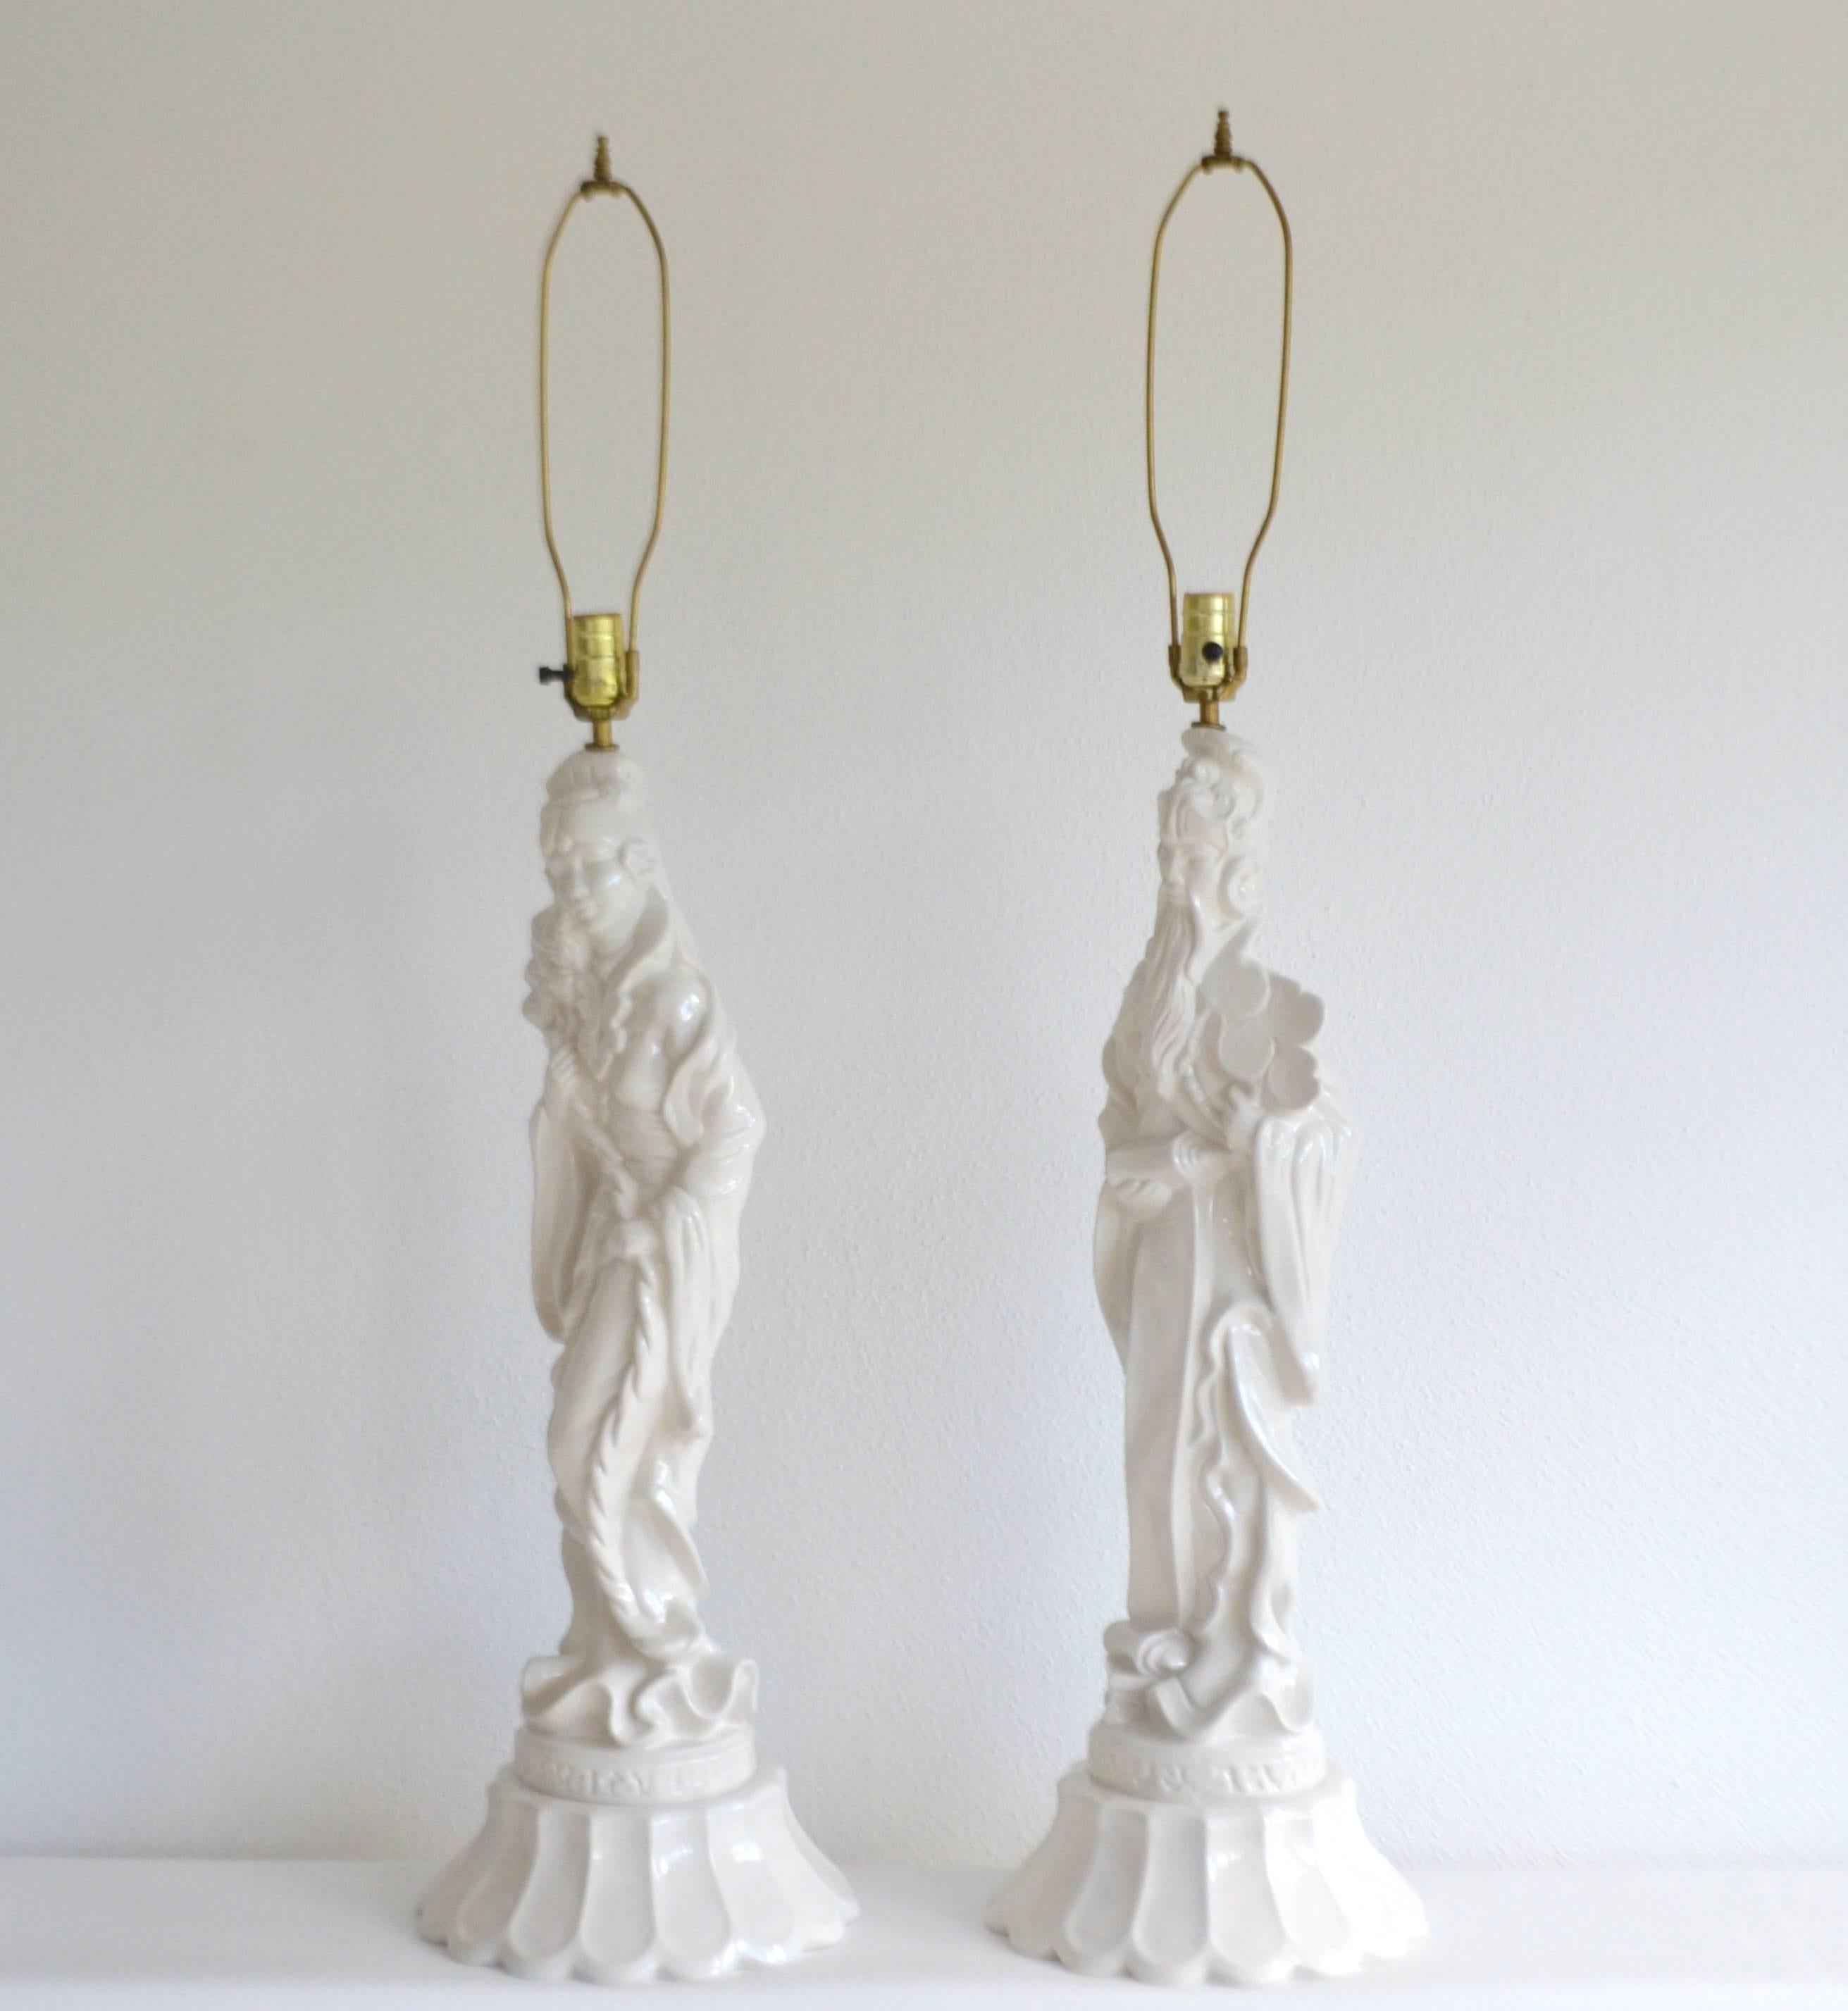 Mid-20th Century Pair of Hollywood Regency Blanc de Chine Ceramic Table Lamps